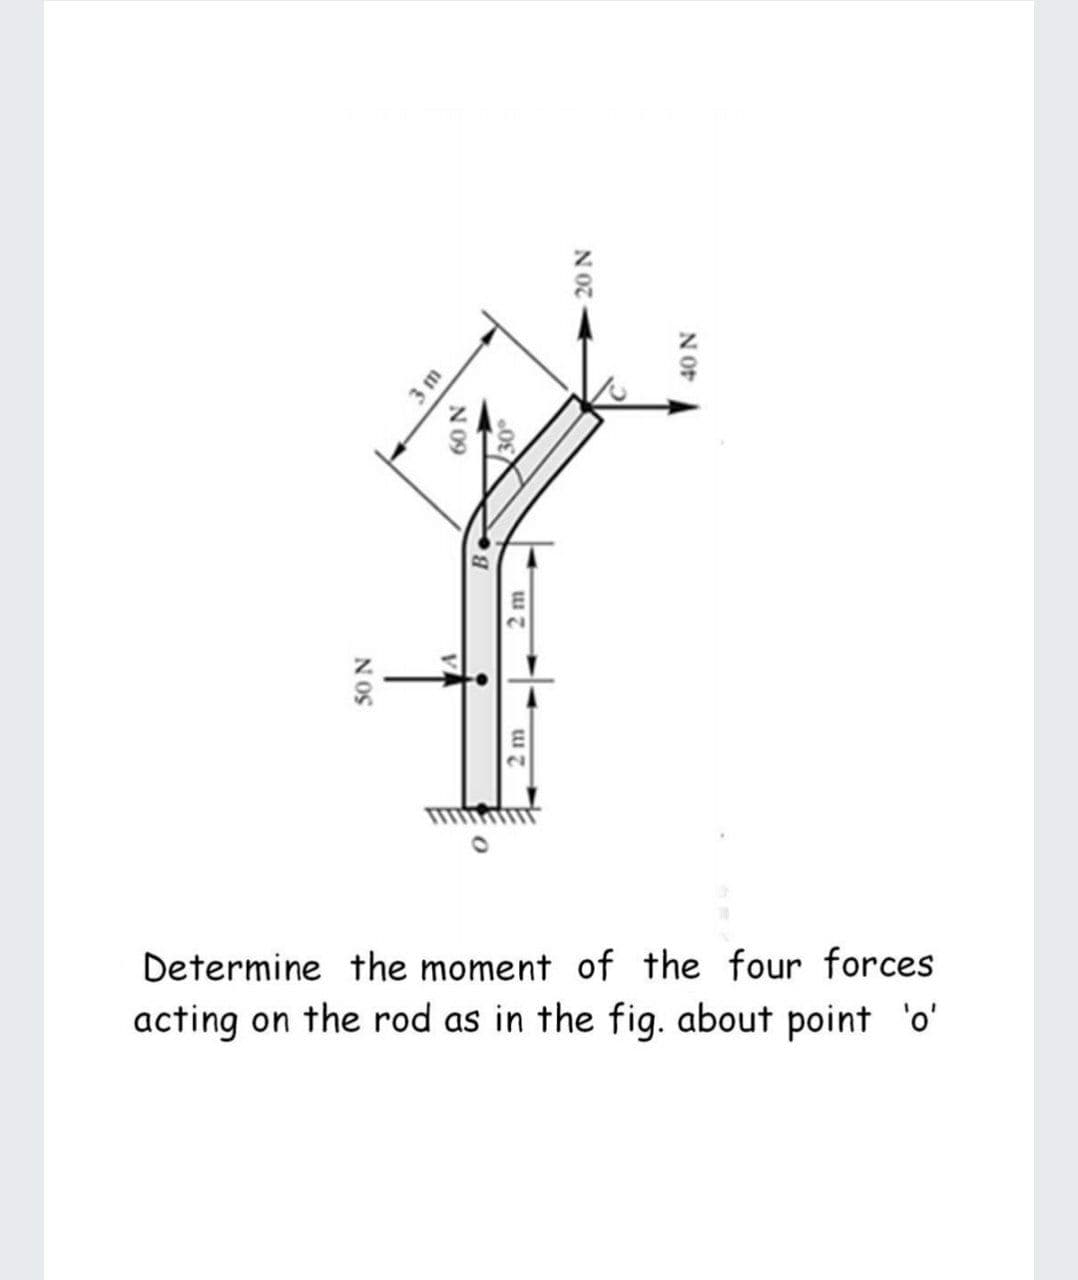 20
Determine the moment of the four forces
acting on the rod as in the fig. about point 'o'
N OF
N 07
N 09
V.
N OS
